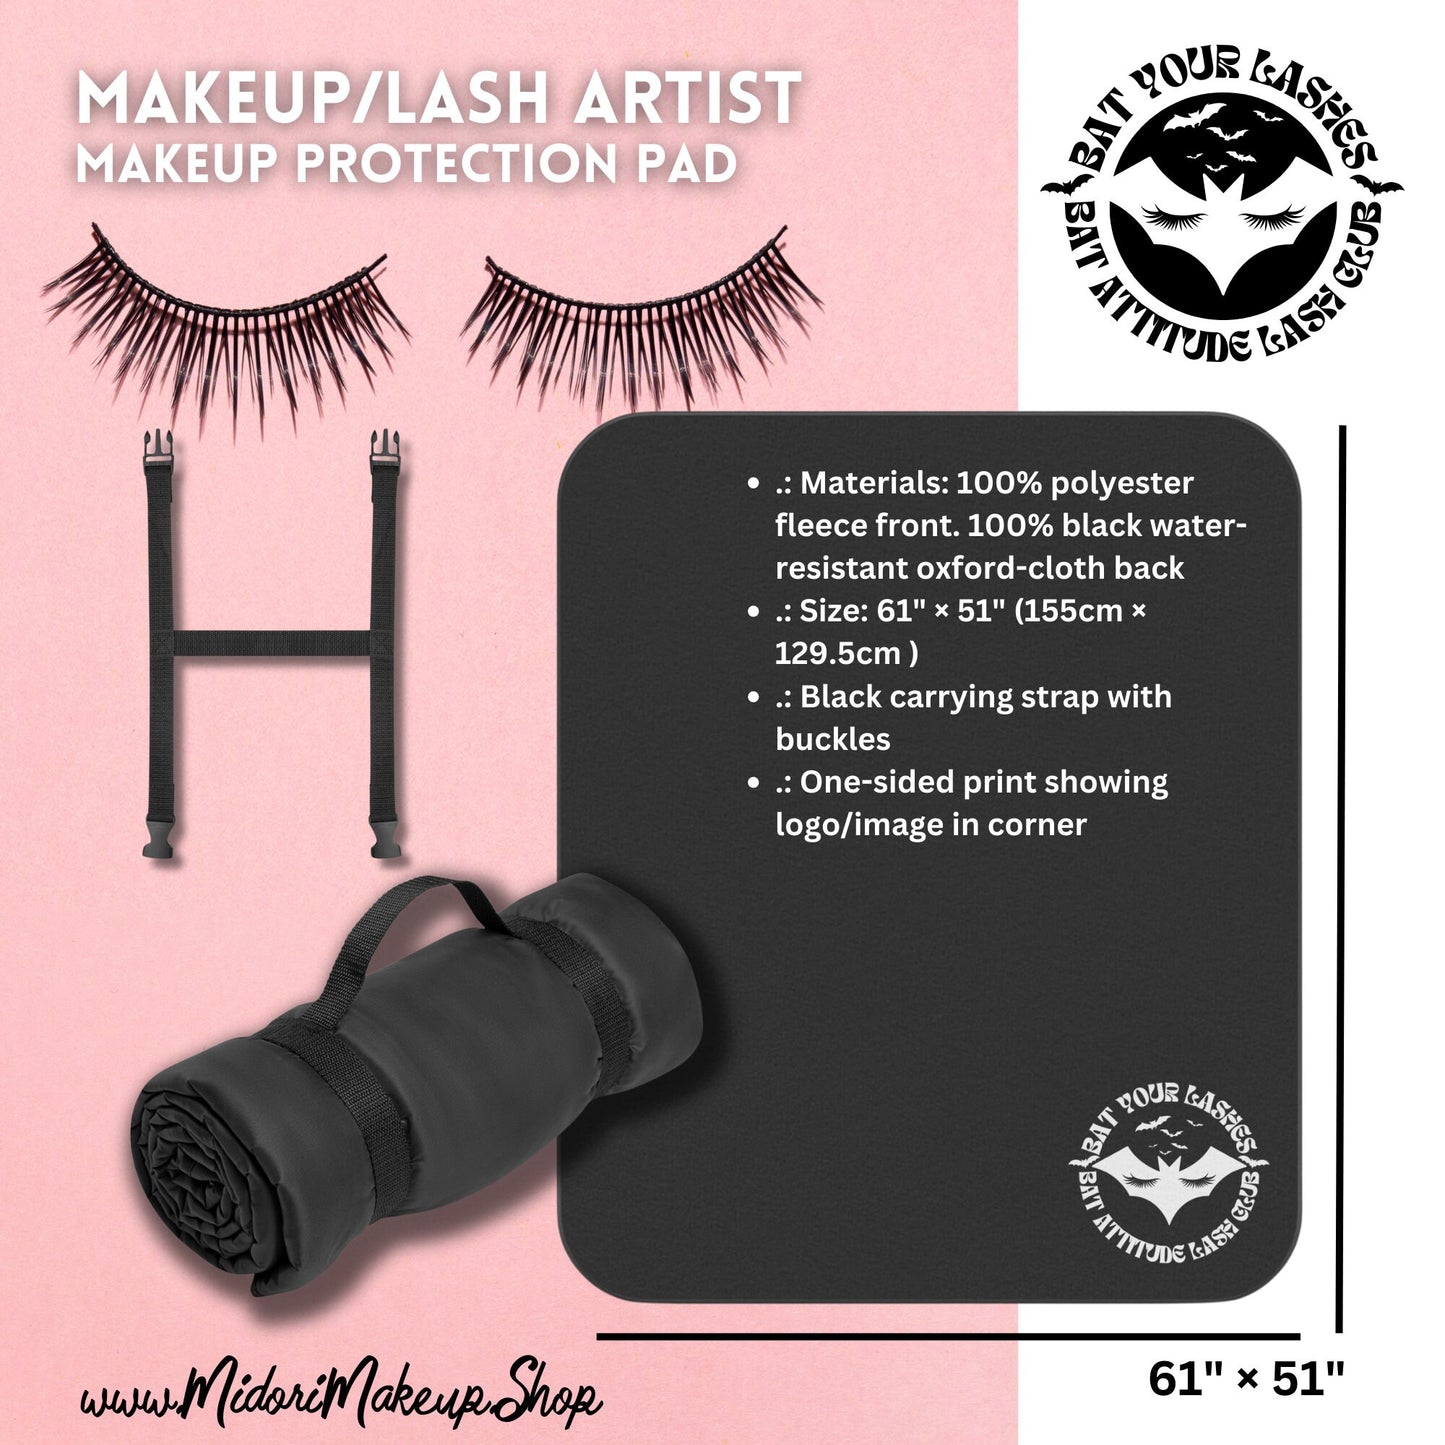 Makeup Artist Travel Protection Pad, Bat Your Lashes Freelance MUA Kit Tool, Water-Resistant Blanket Gift, Protect Surfaces from Makeup